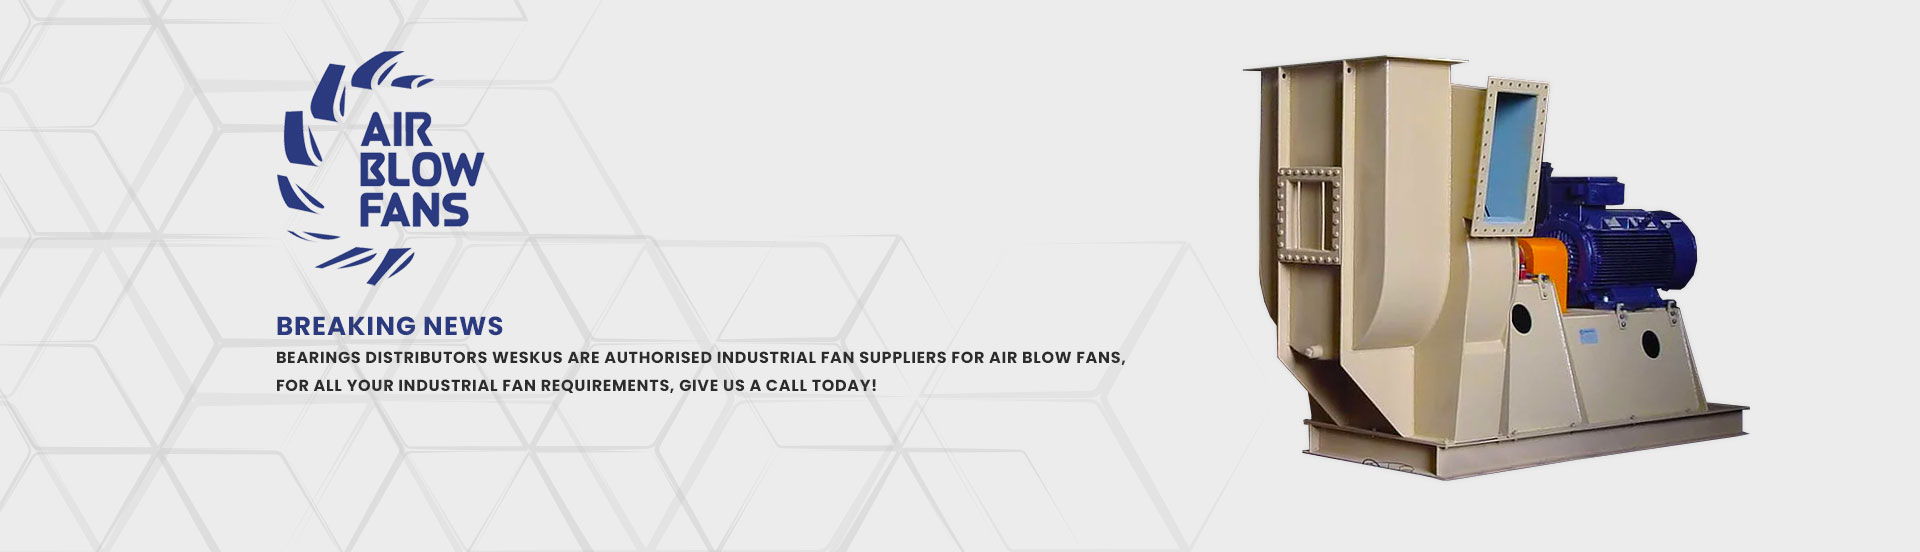 BD Weksus is a distributor of Air Blow Fans